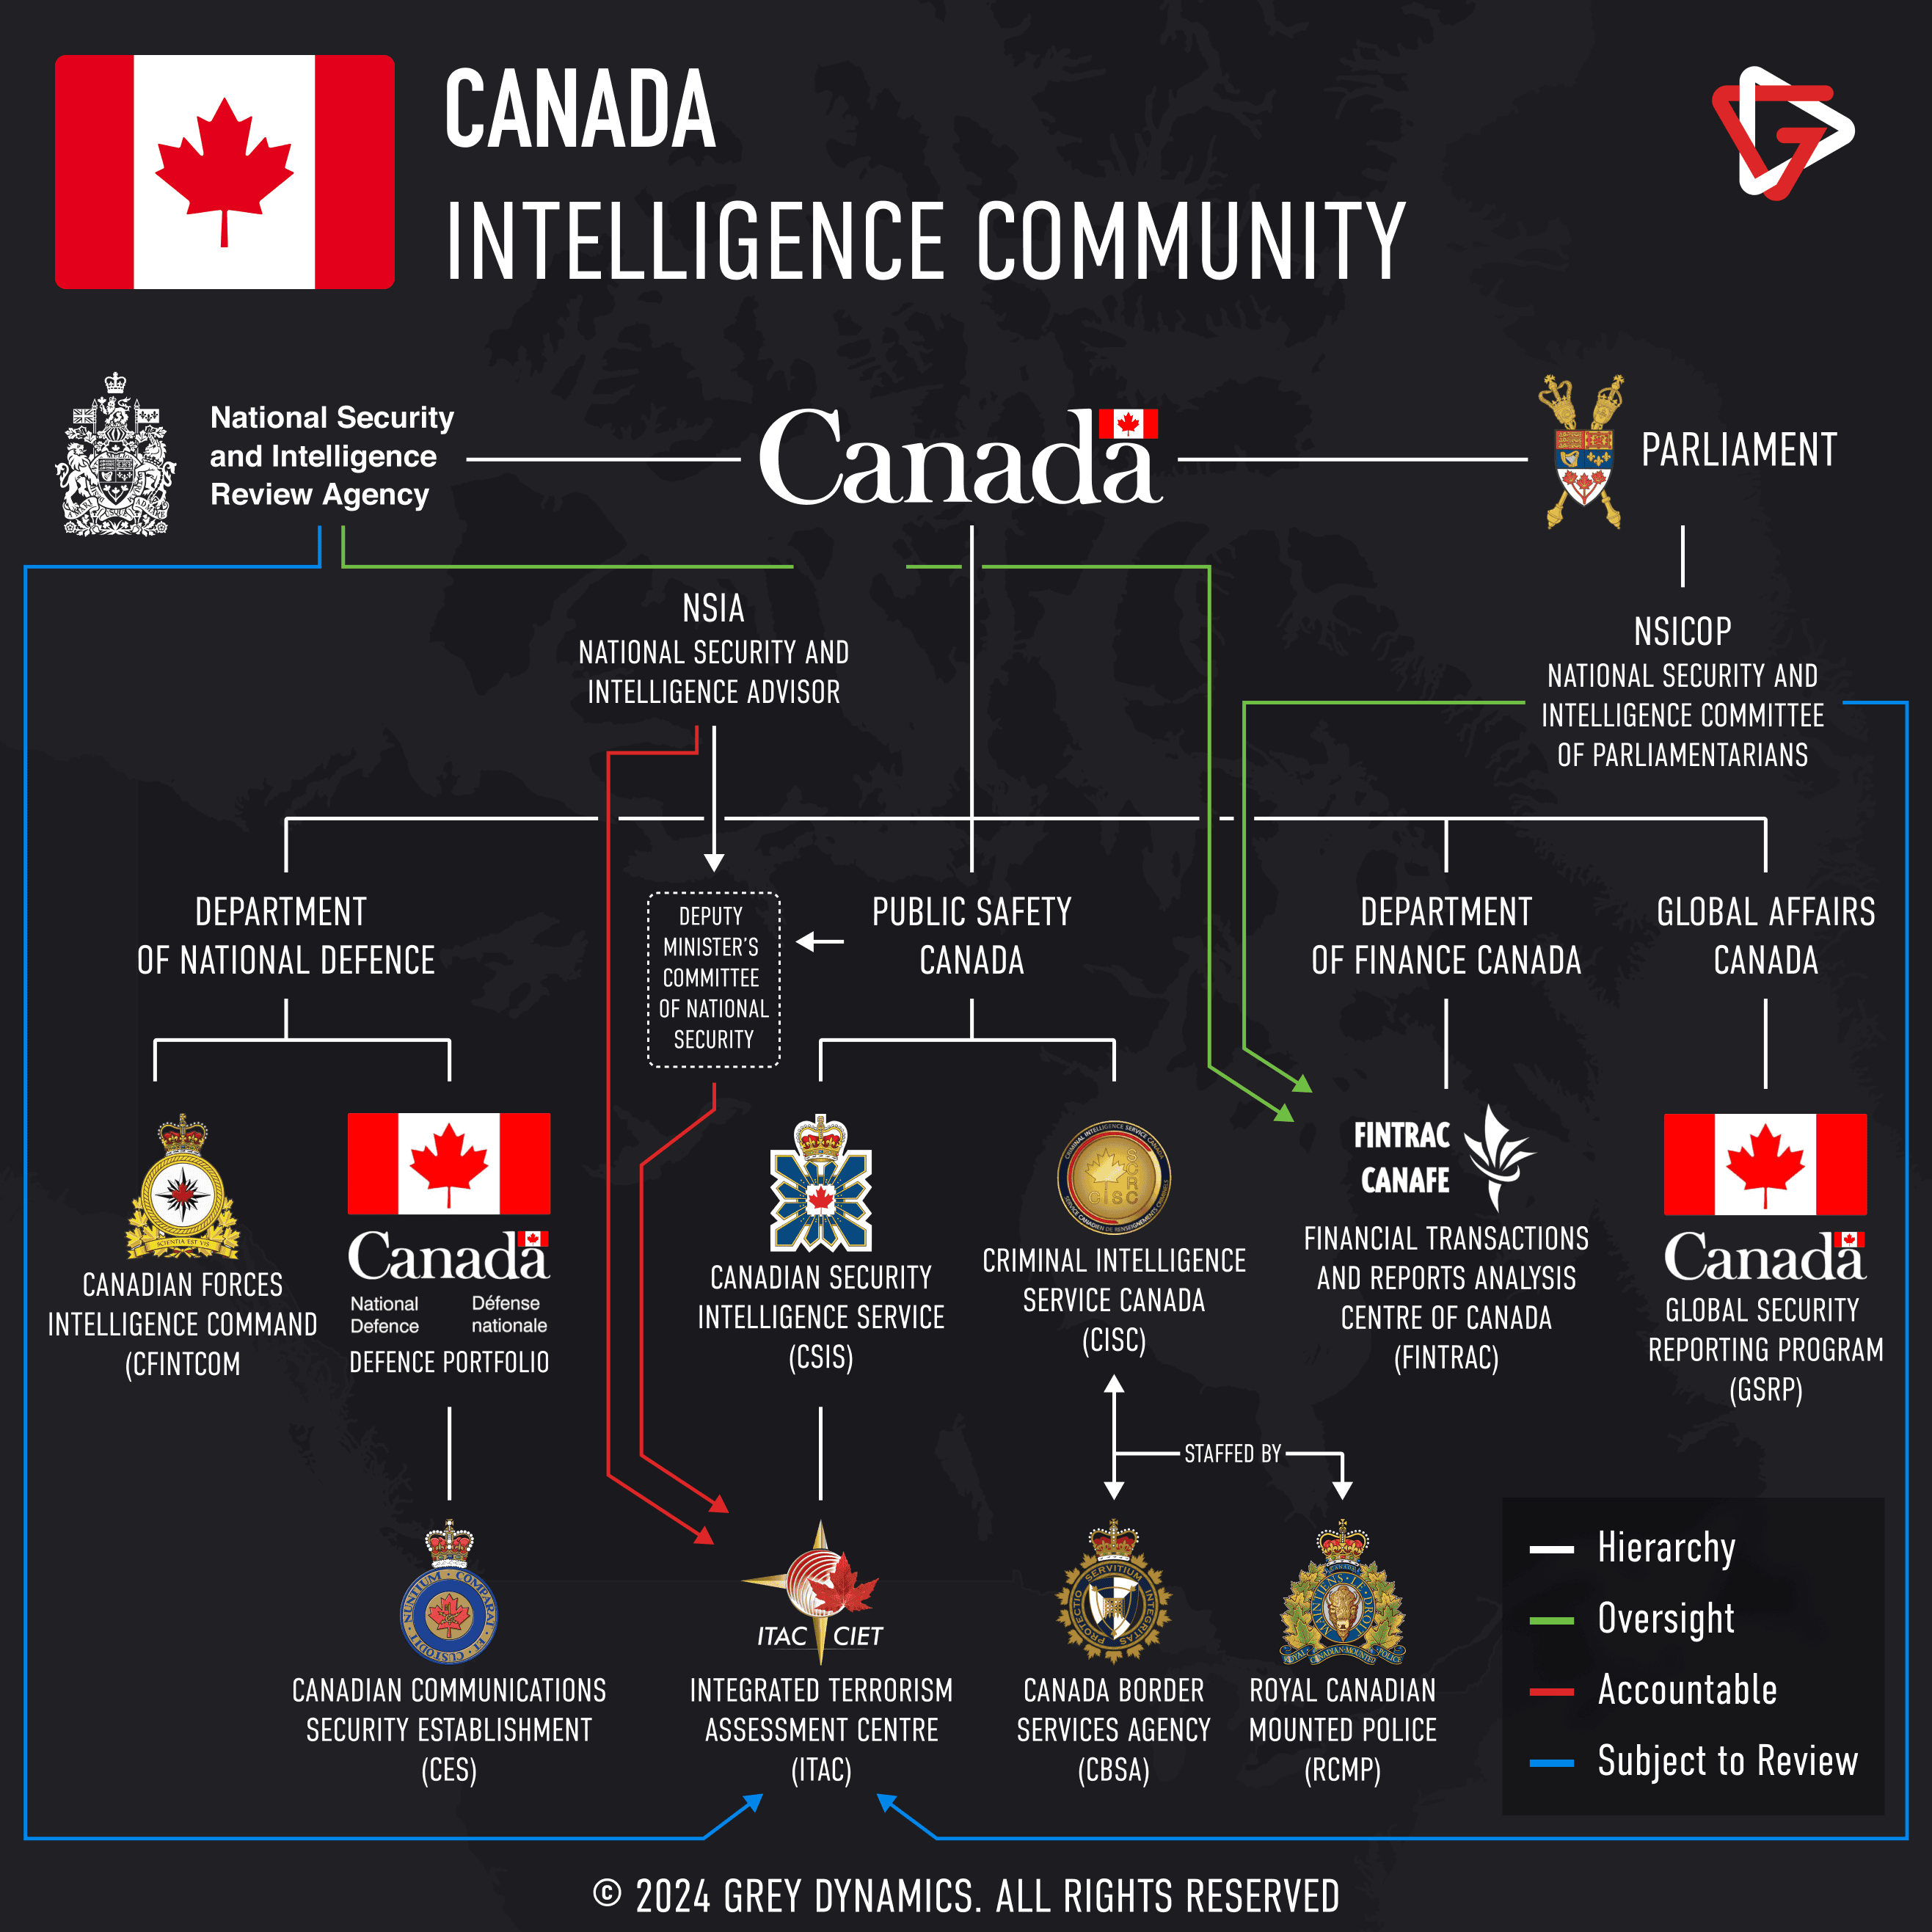 Canada Intelligence Community structure. Research & Graphic By: Grey Dynamics